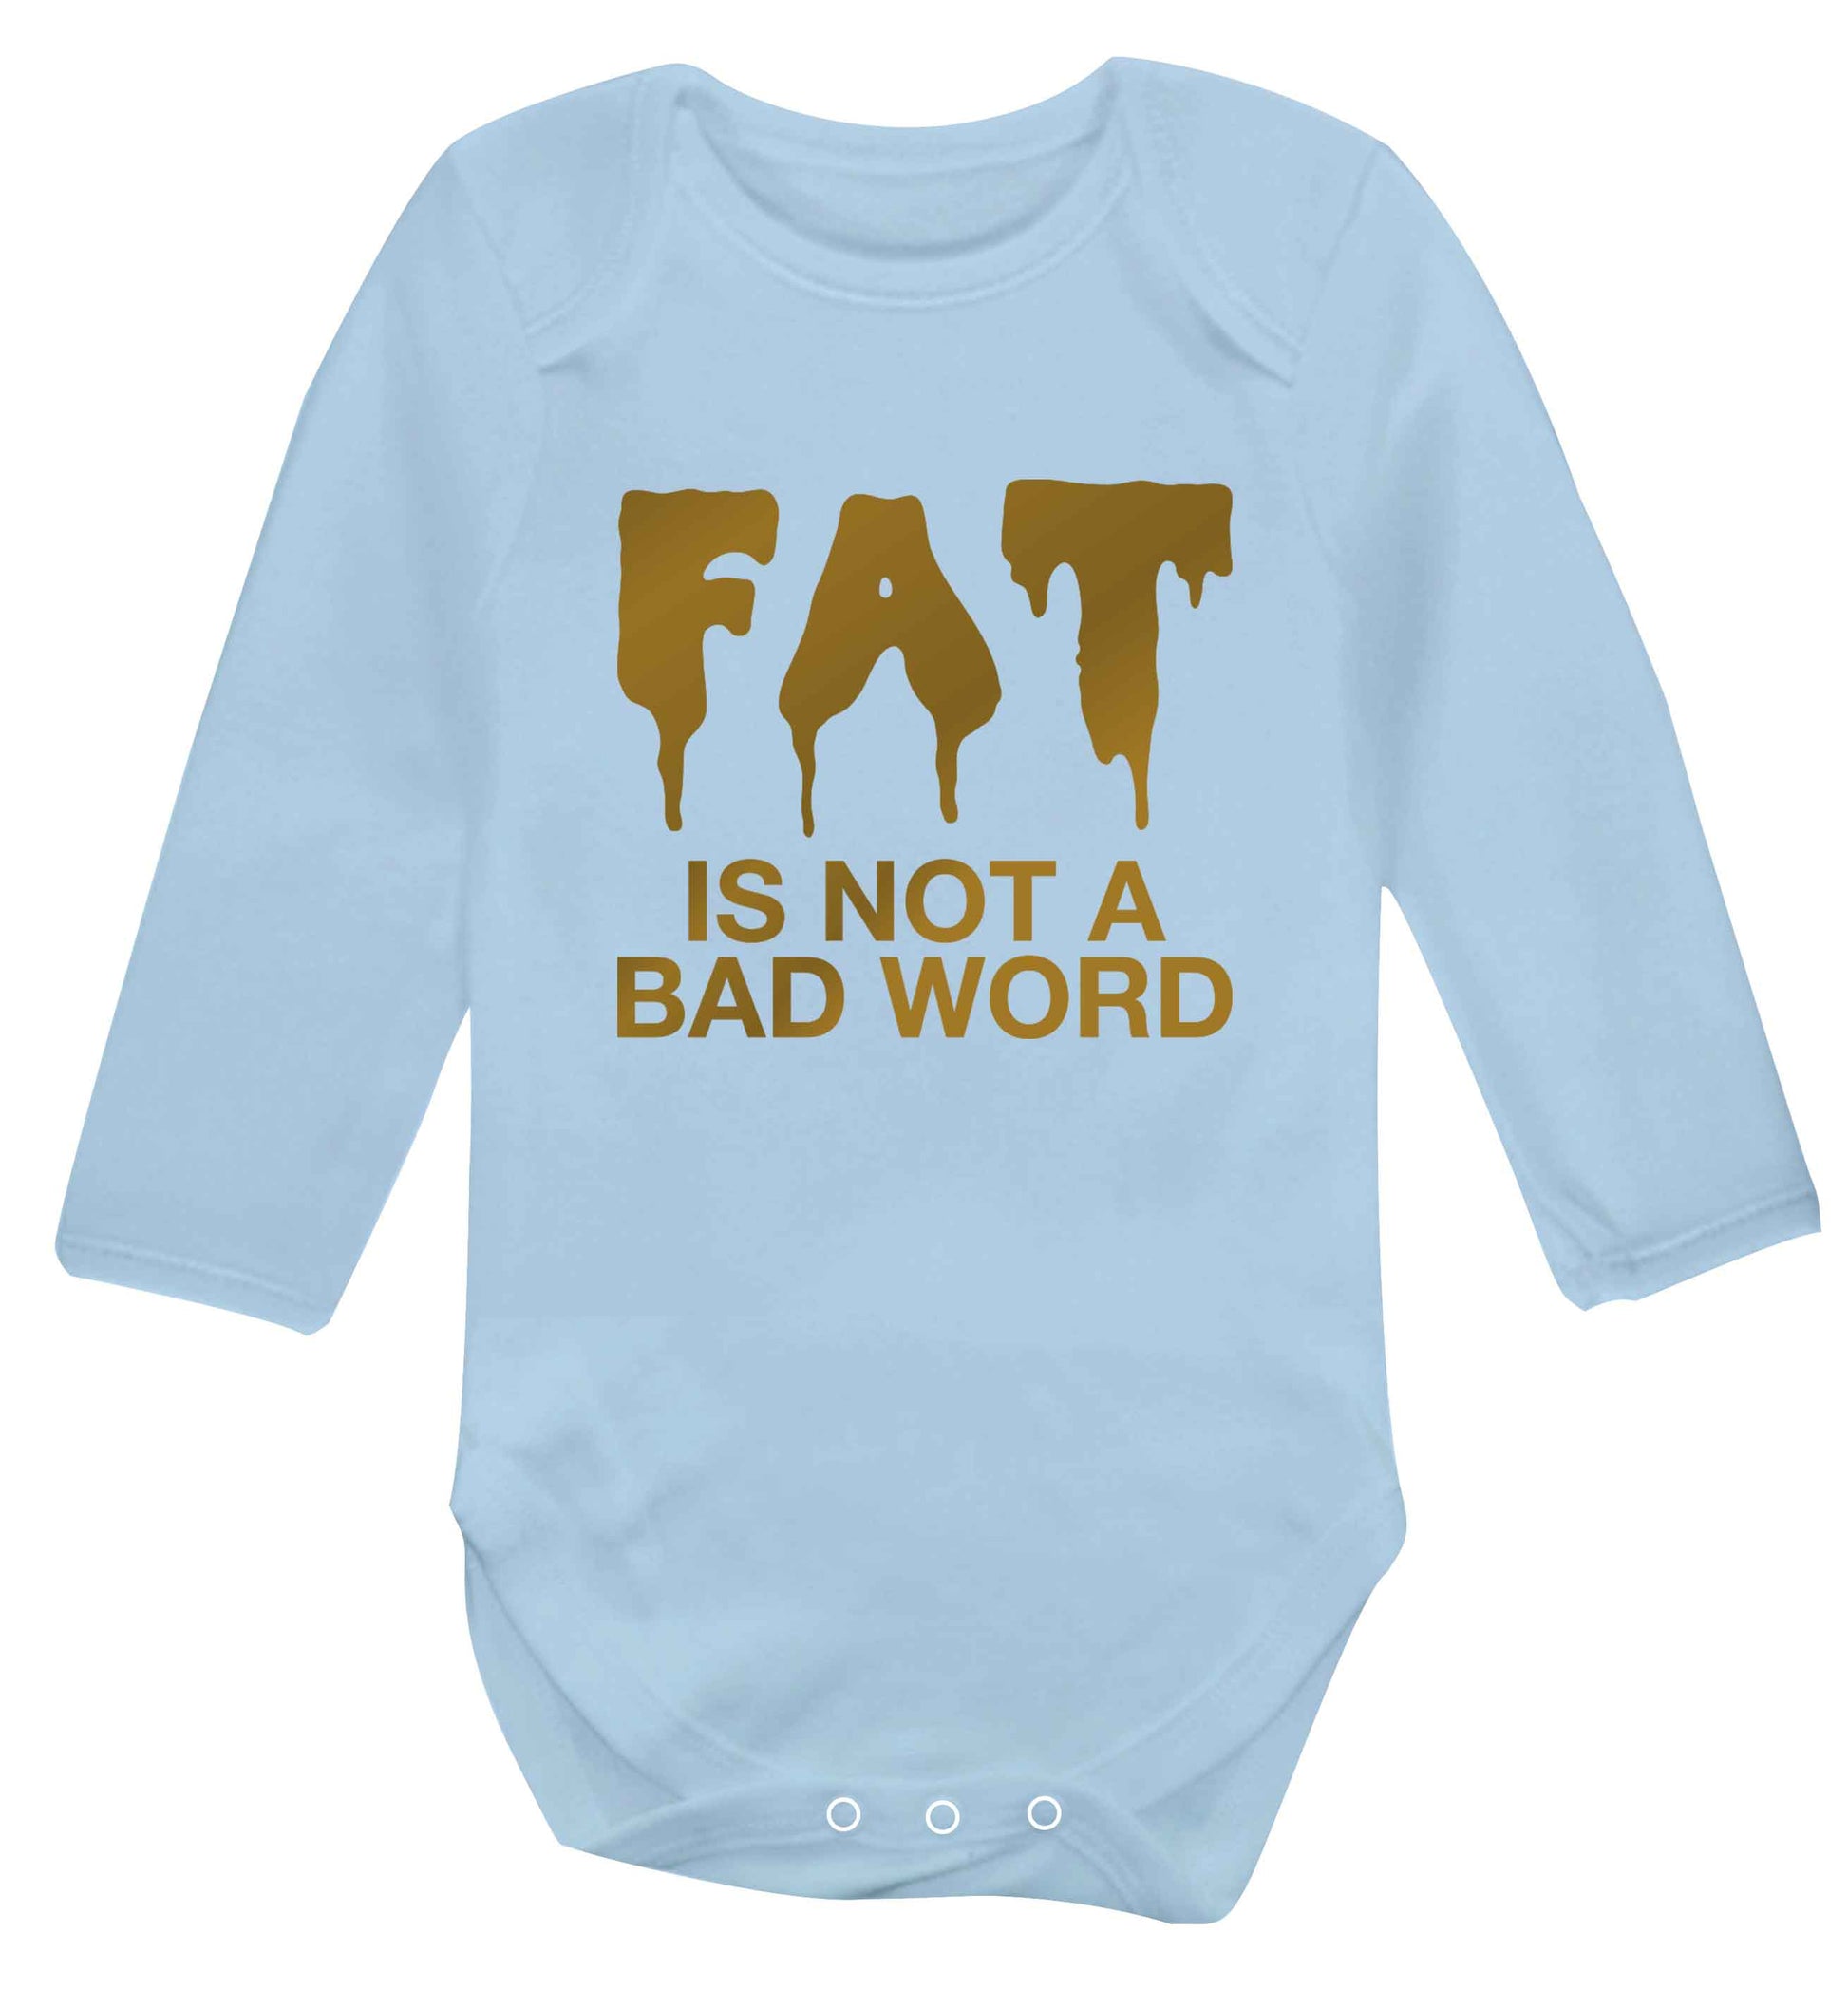 Fat is not a bad word baby vest long sleeved pale blue 6-12 months